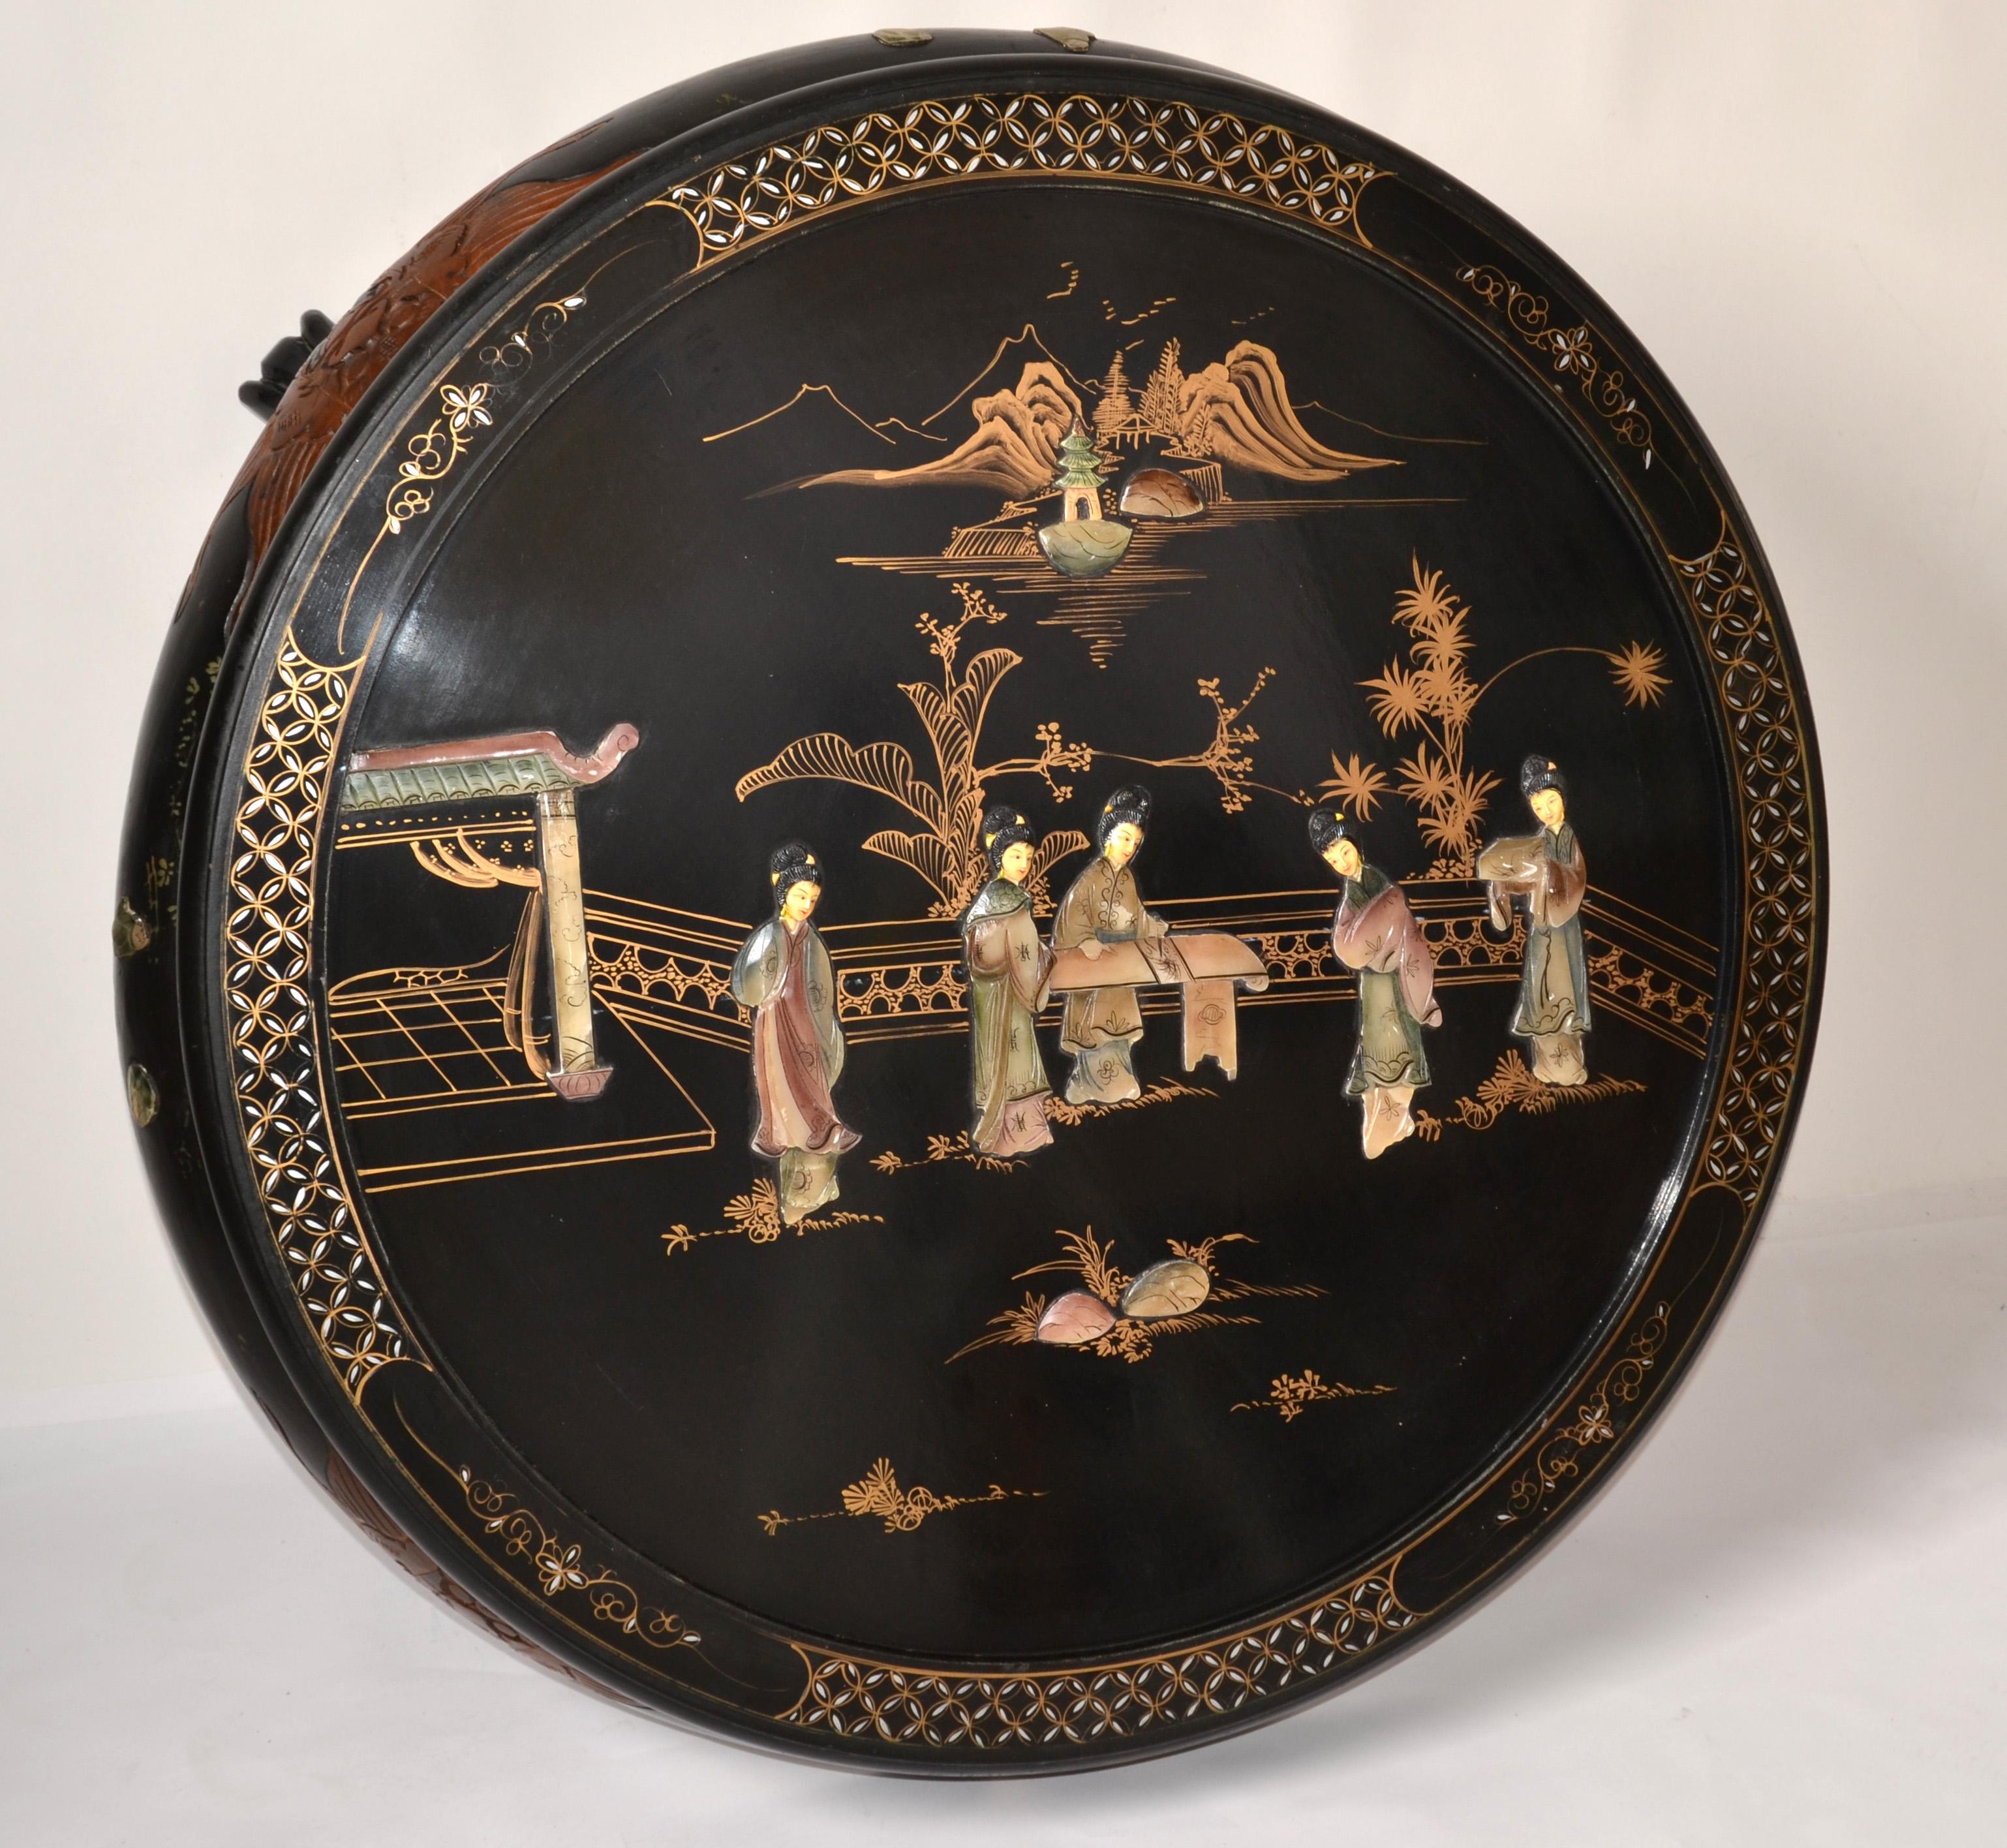 Add a charming touch of Oriental design to your décor with this stunning handcrafted black lacquer coffee table embossed with Jade stonework and Bone inlay. The women gathering in the center of this outstanding creation are reminiscent of the